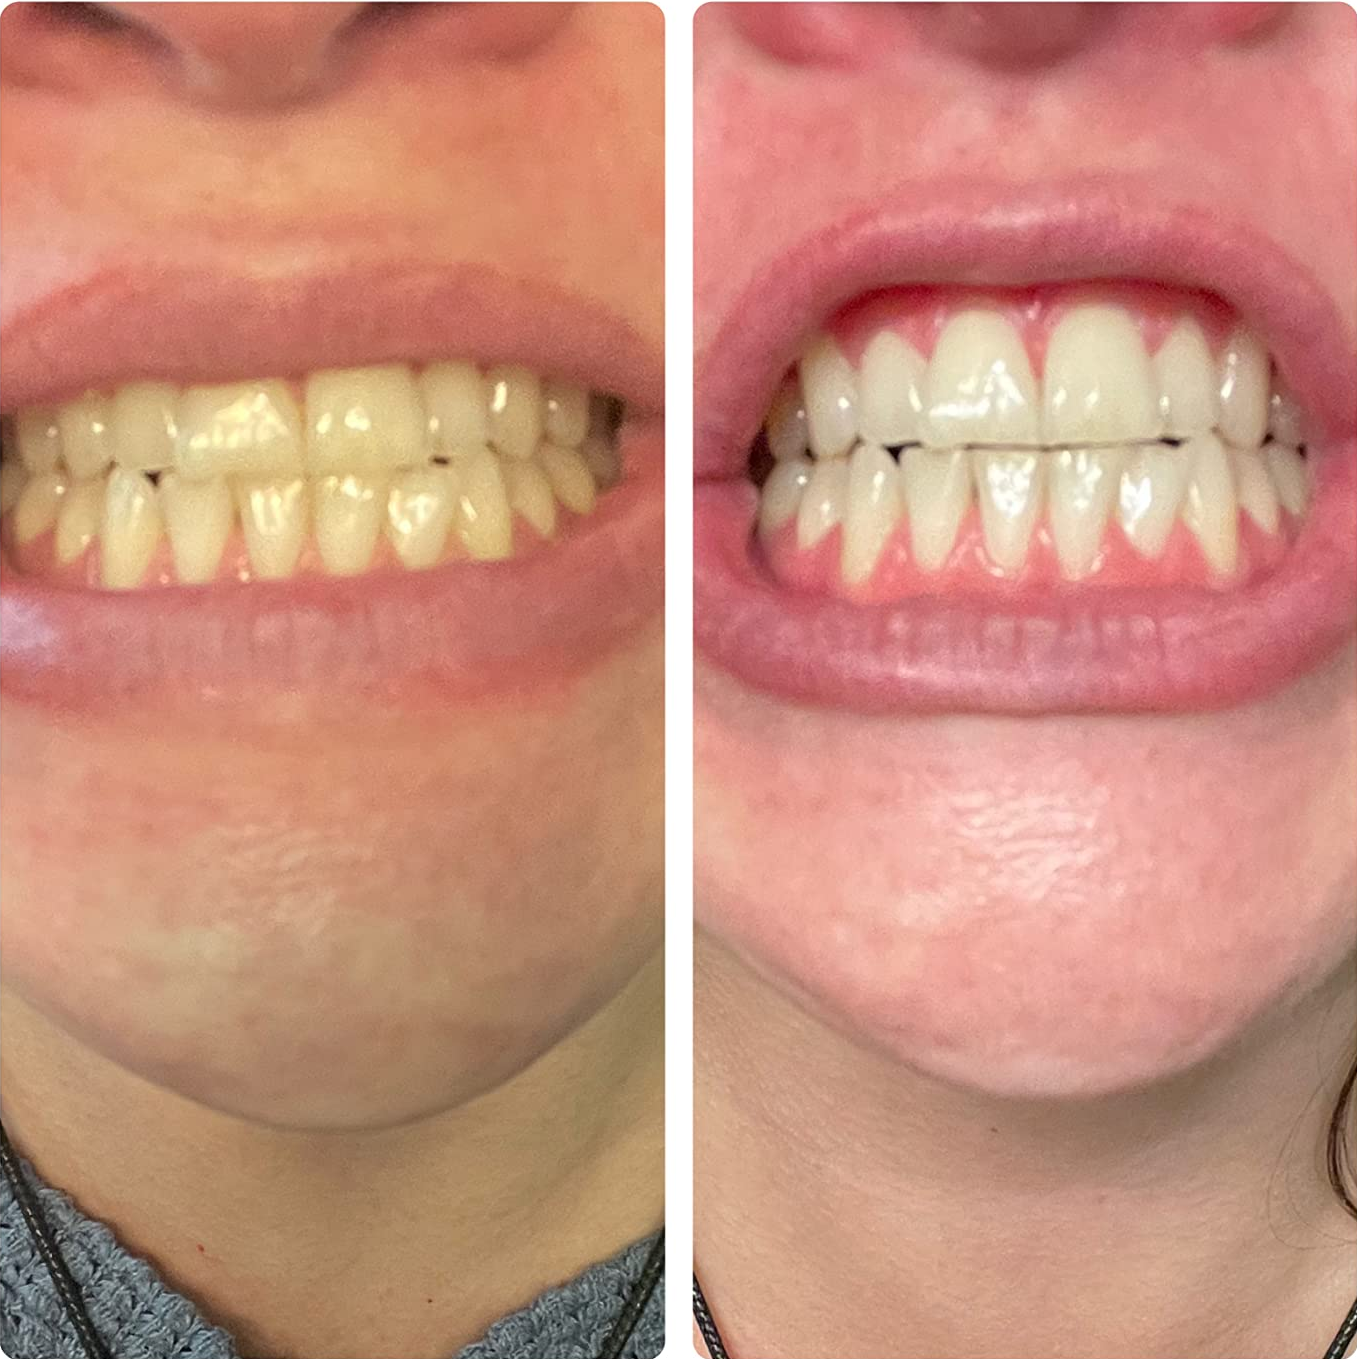 split image of reviewer's teeth before and after using whitening pen with teeth much whiter after